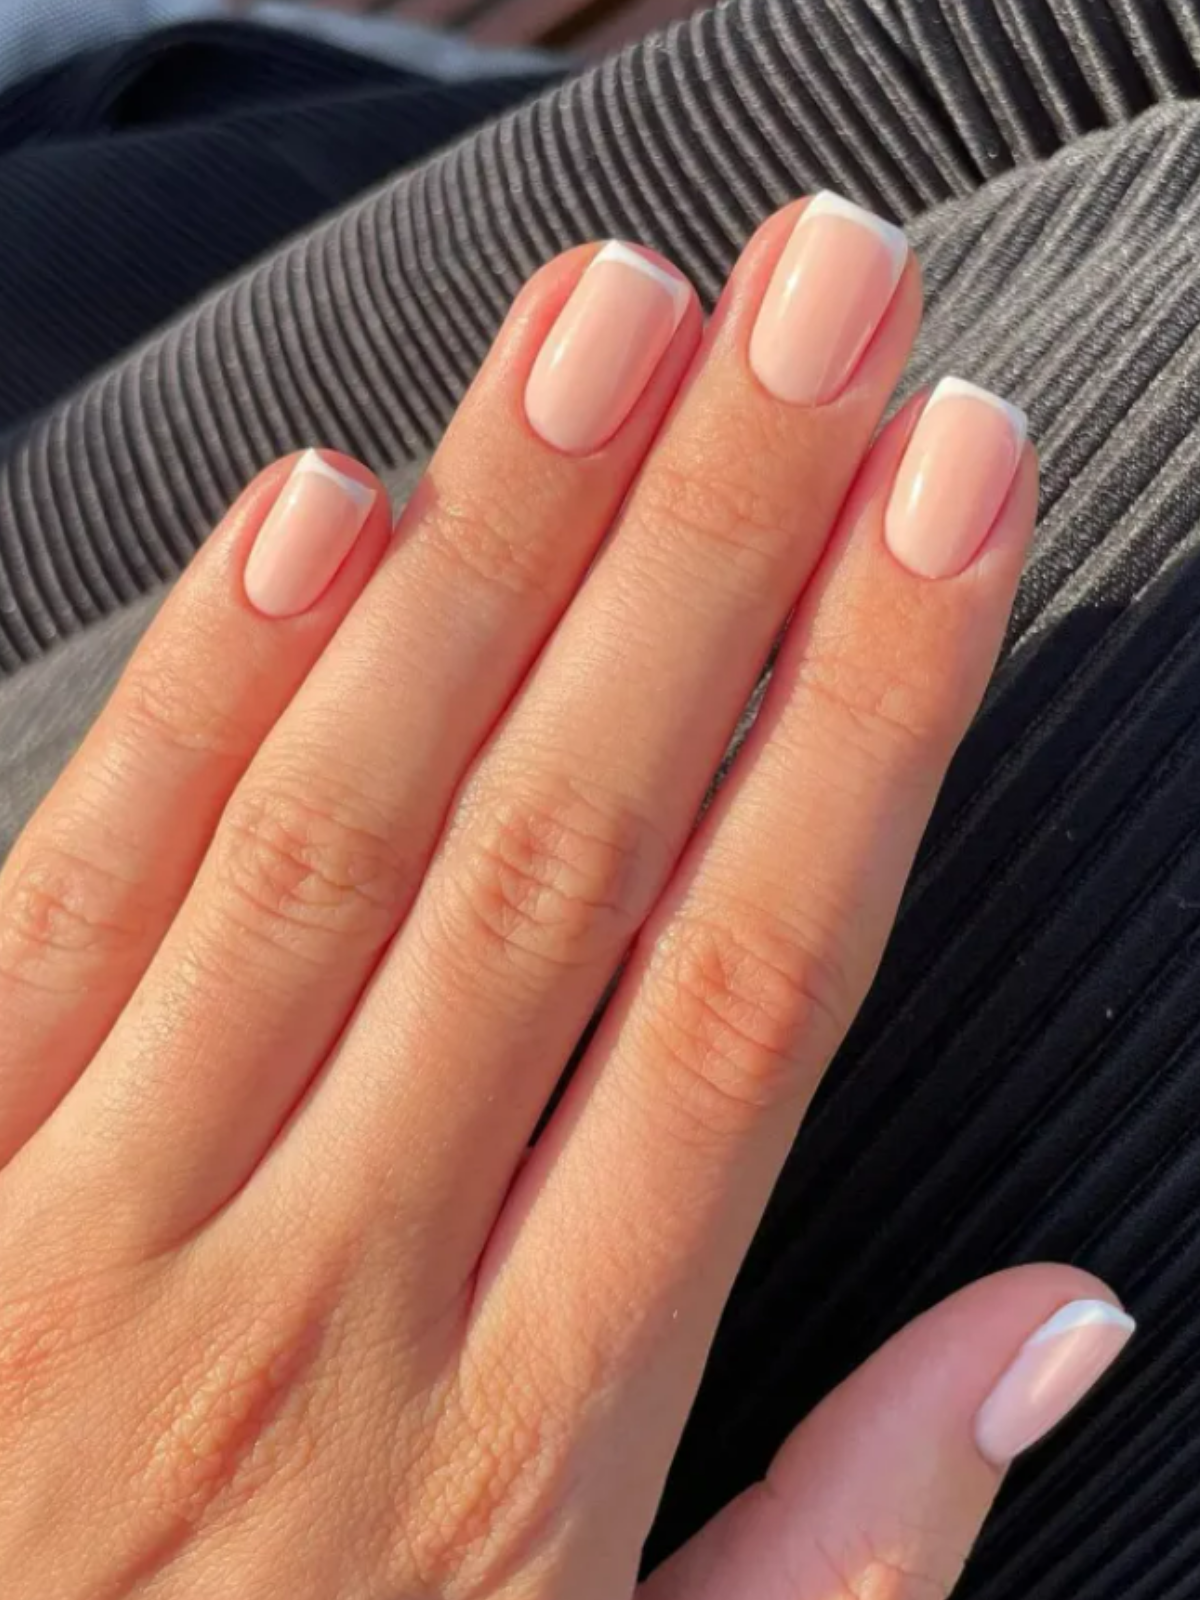 Manicure Monday - Pastel Skittles French Tip Nails | See the World in PINK